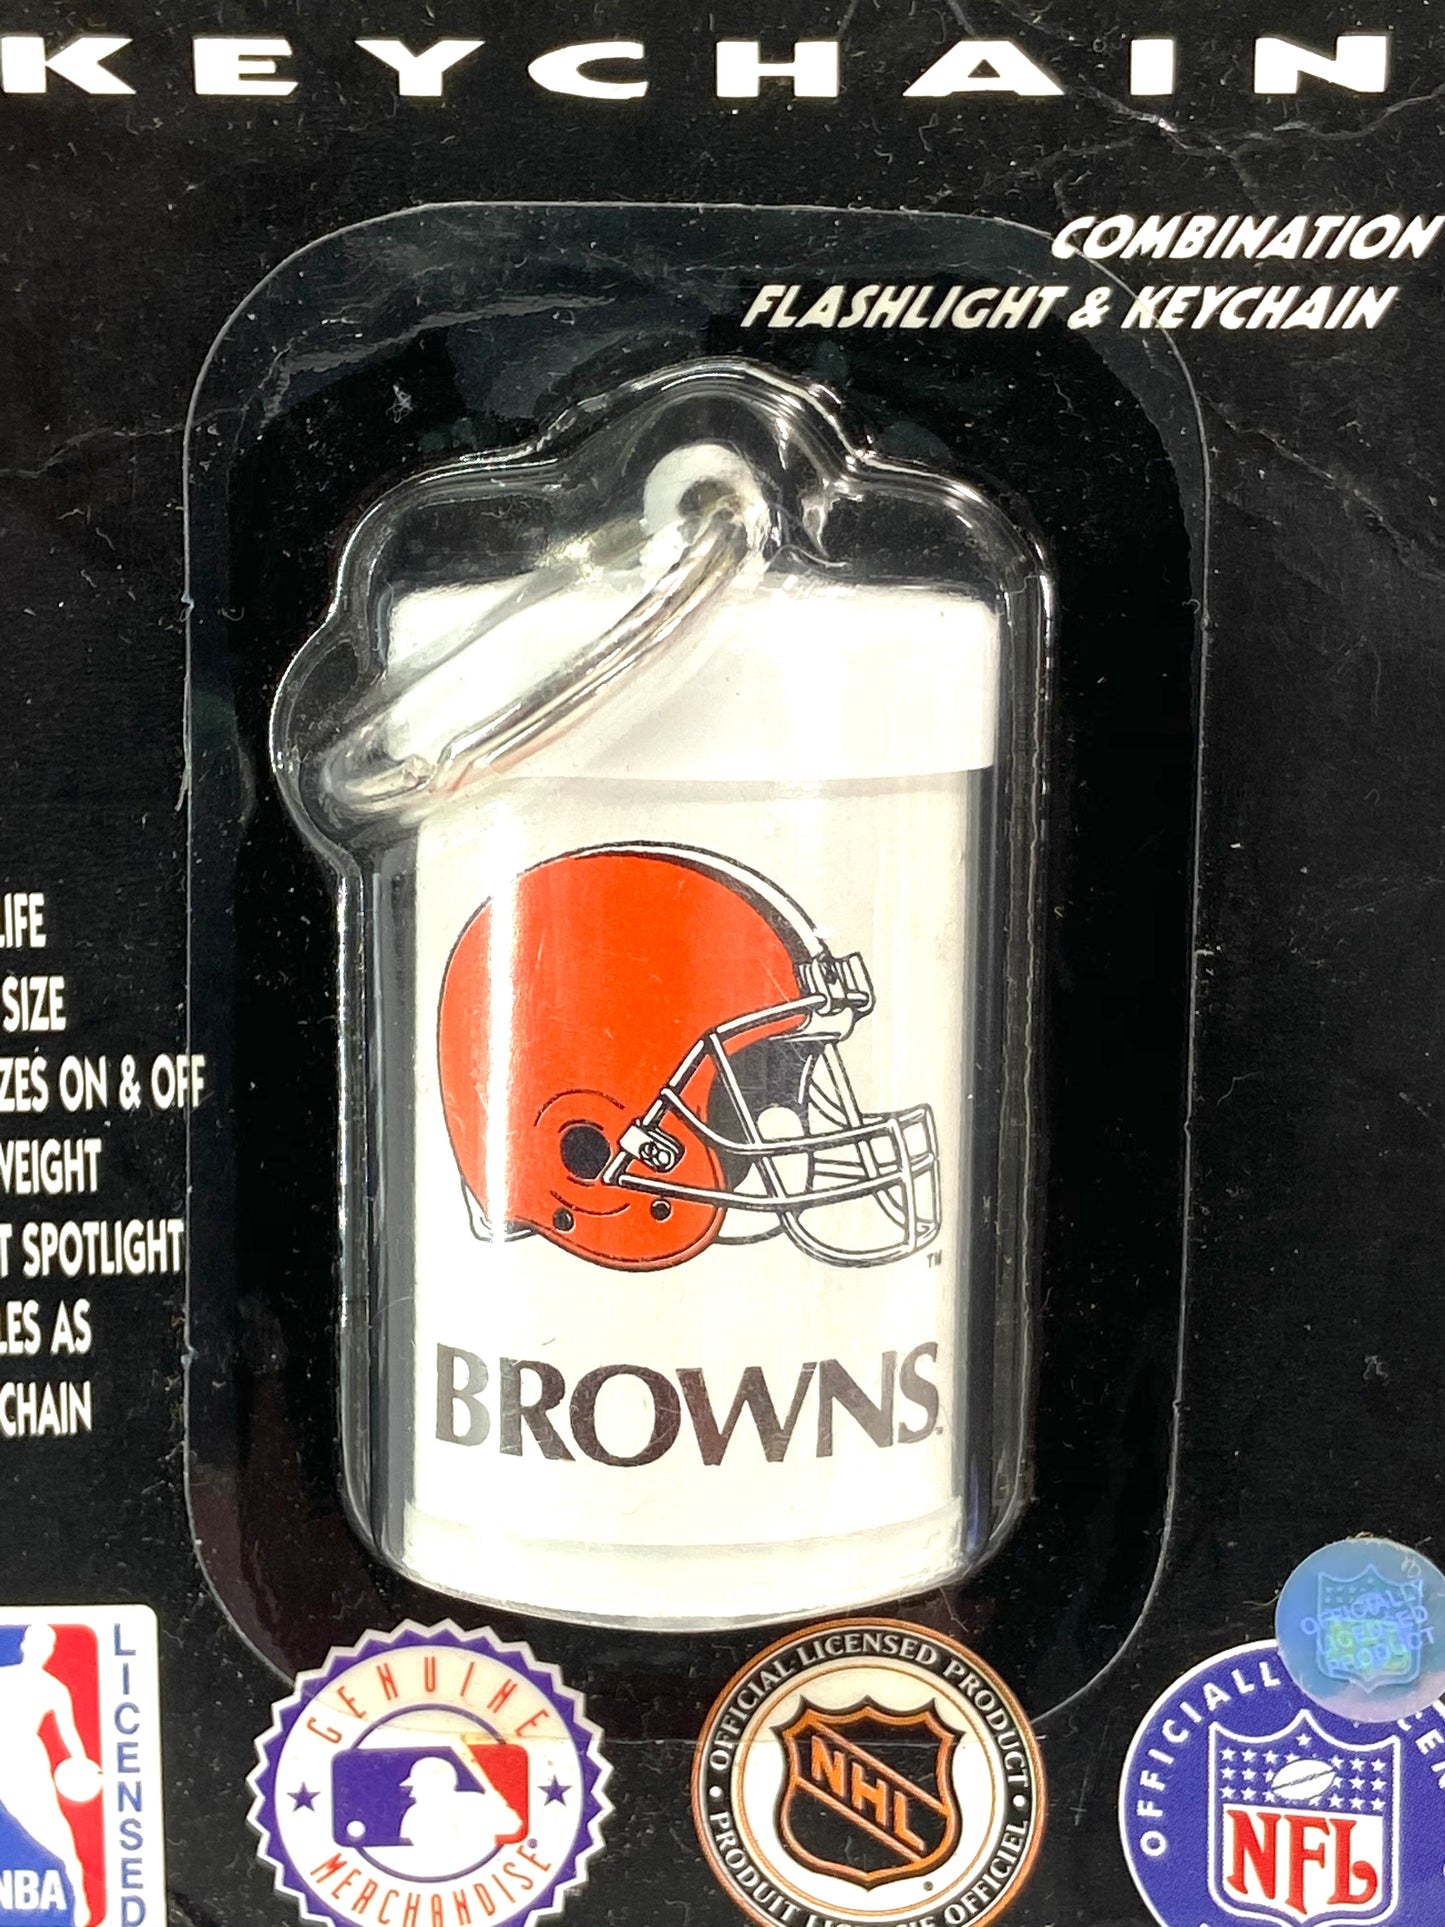 Cleveland Browns Vintage NFL Keychain by Good Stuff Corp.